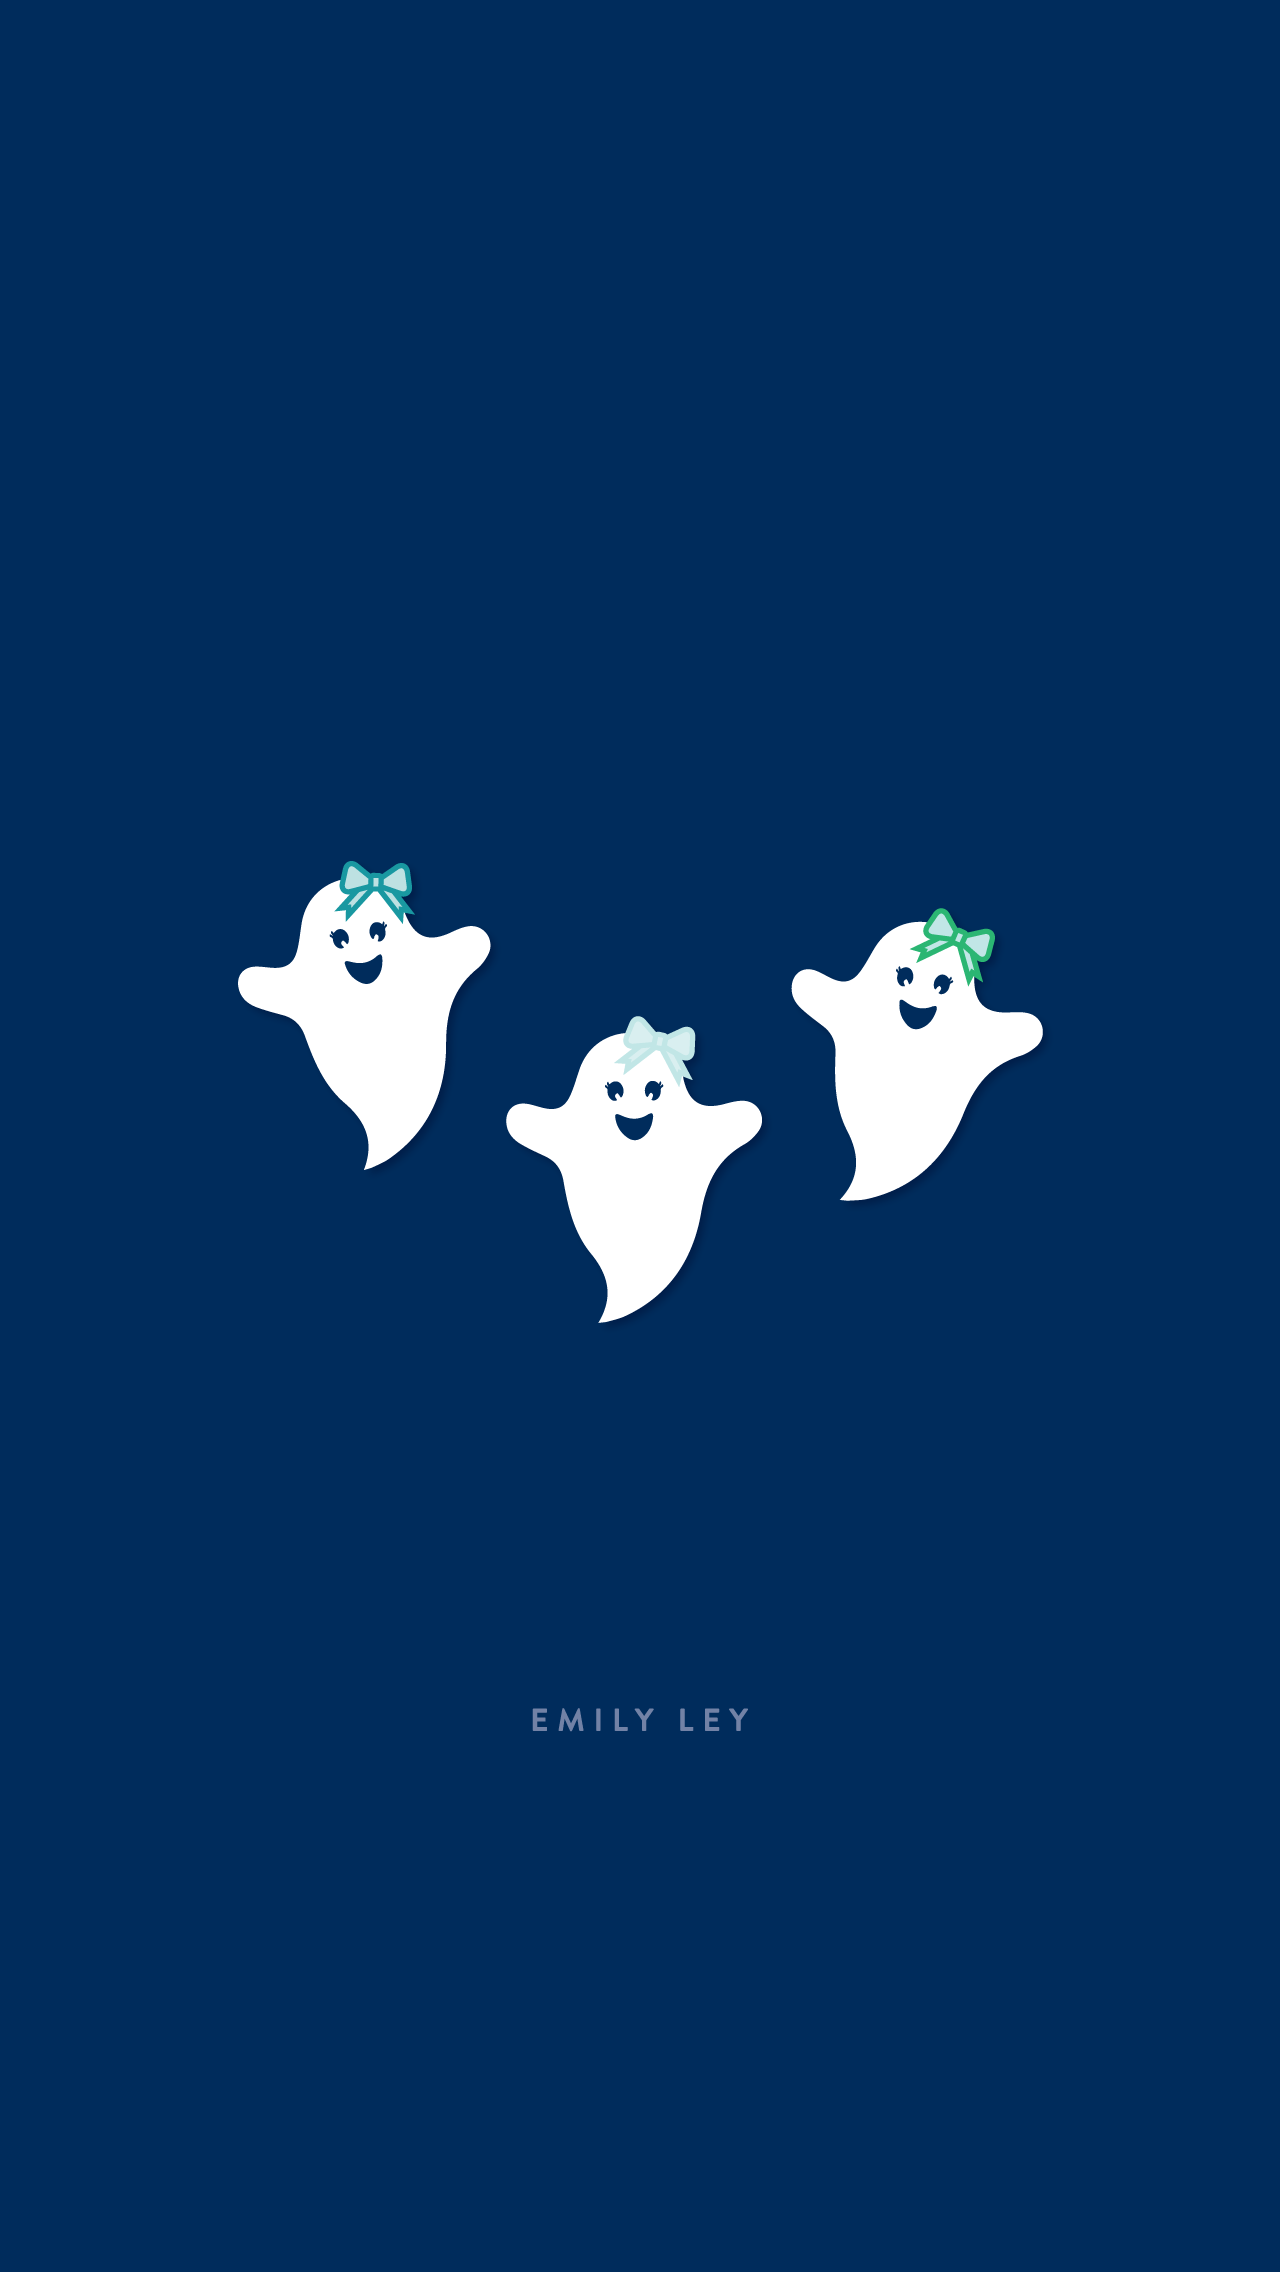 Free iPhone Wallpaper for Halloween. Ghosts Wallpaper. Navy. Happy Ghosts. Disney phone background, iPhone wallpaper fall, Disney phone wallpaper